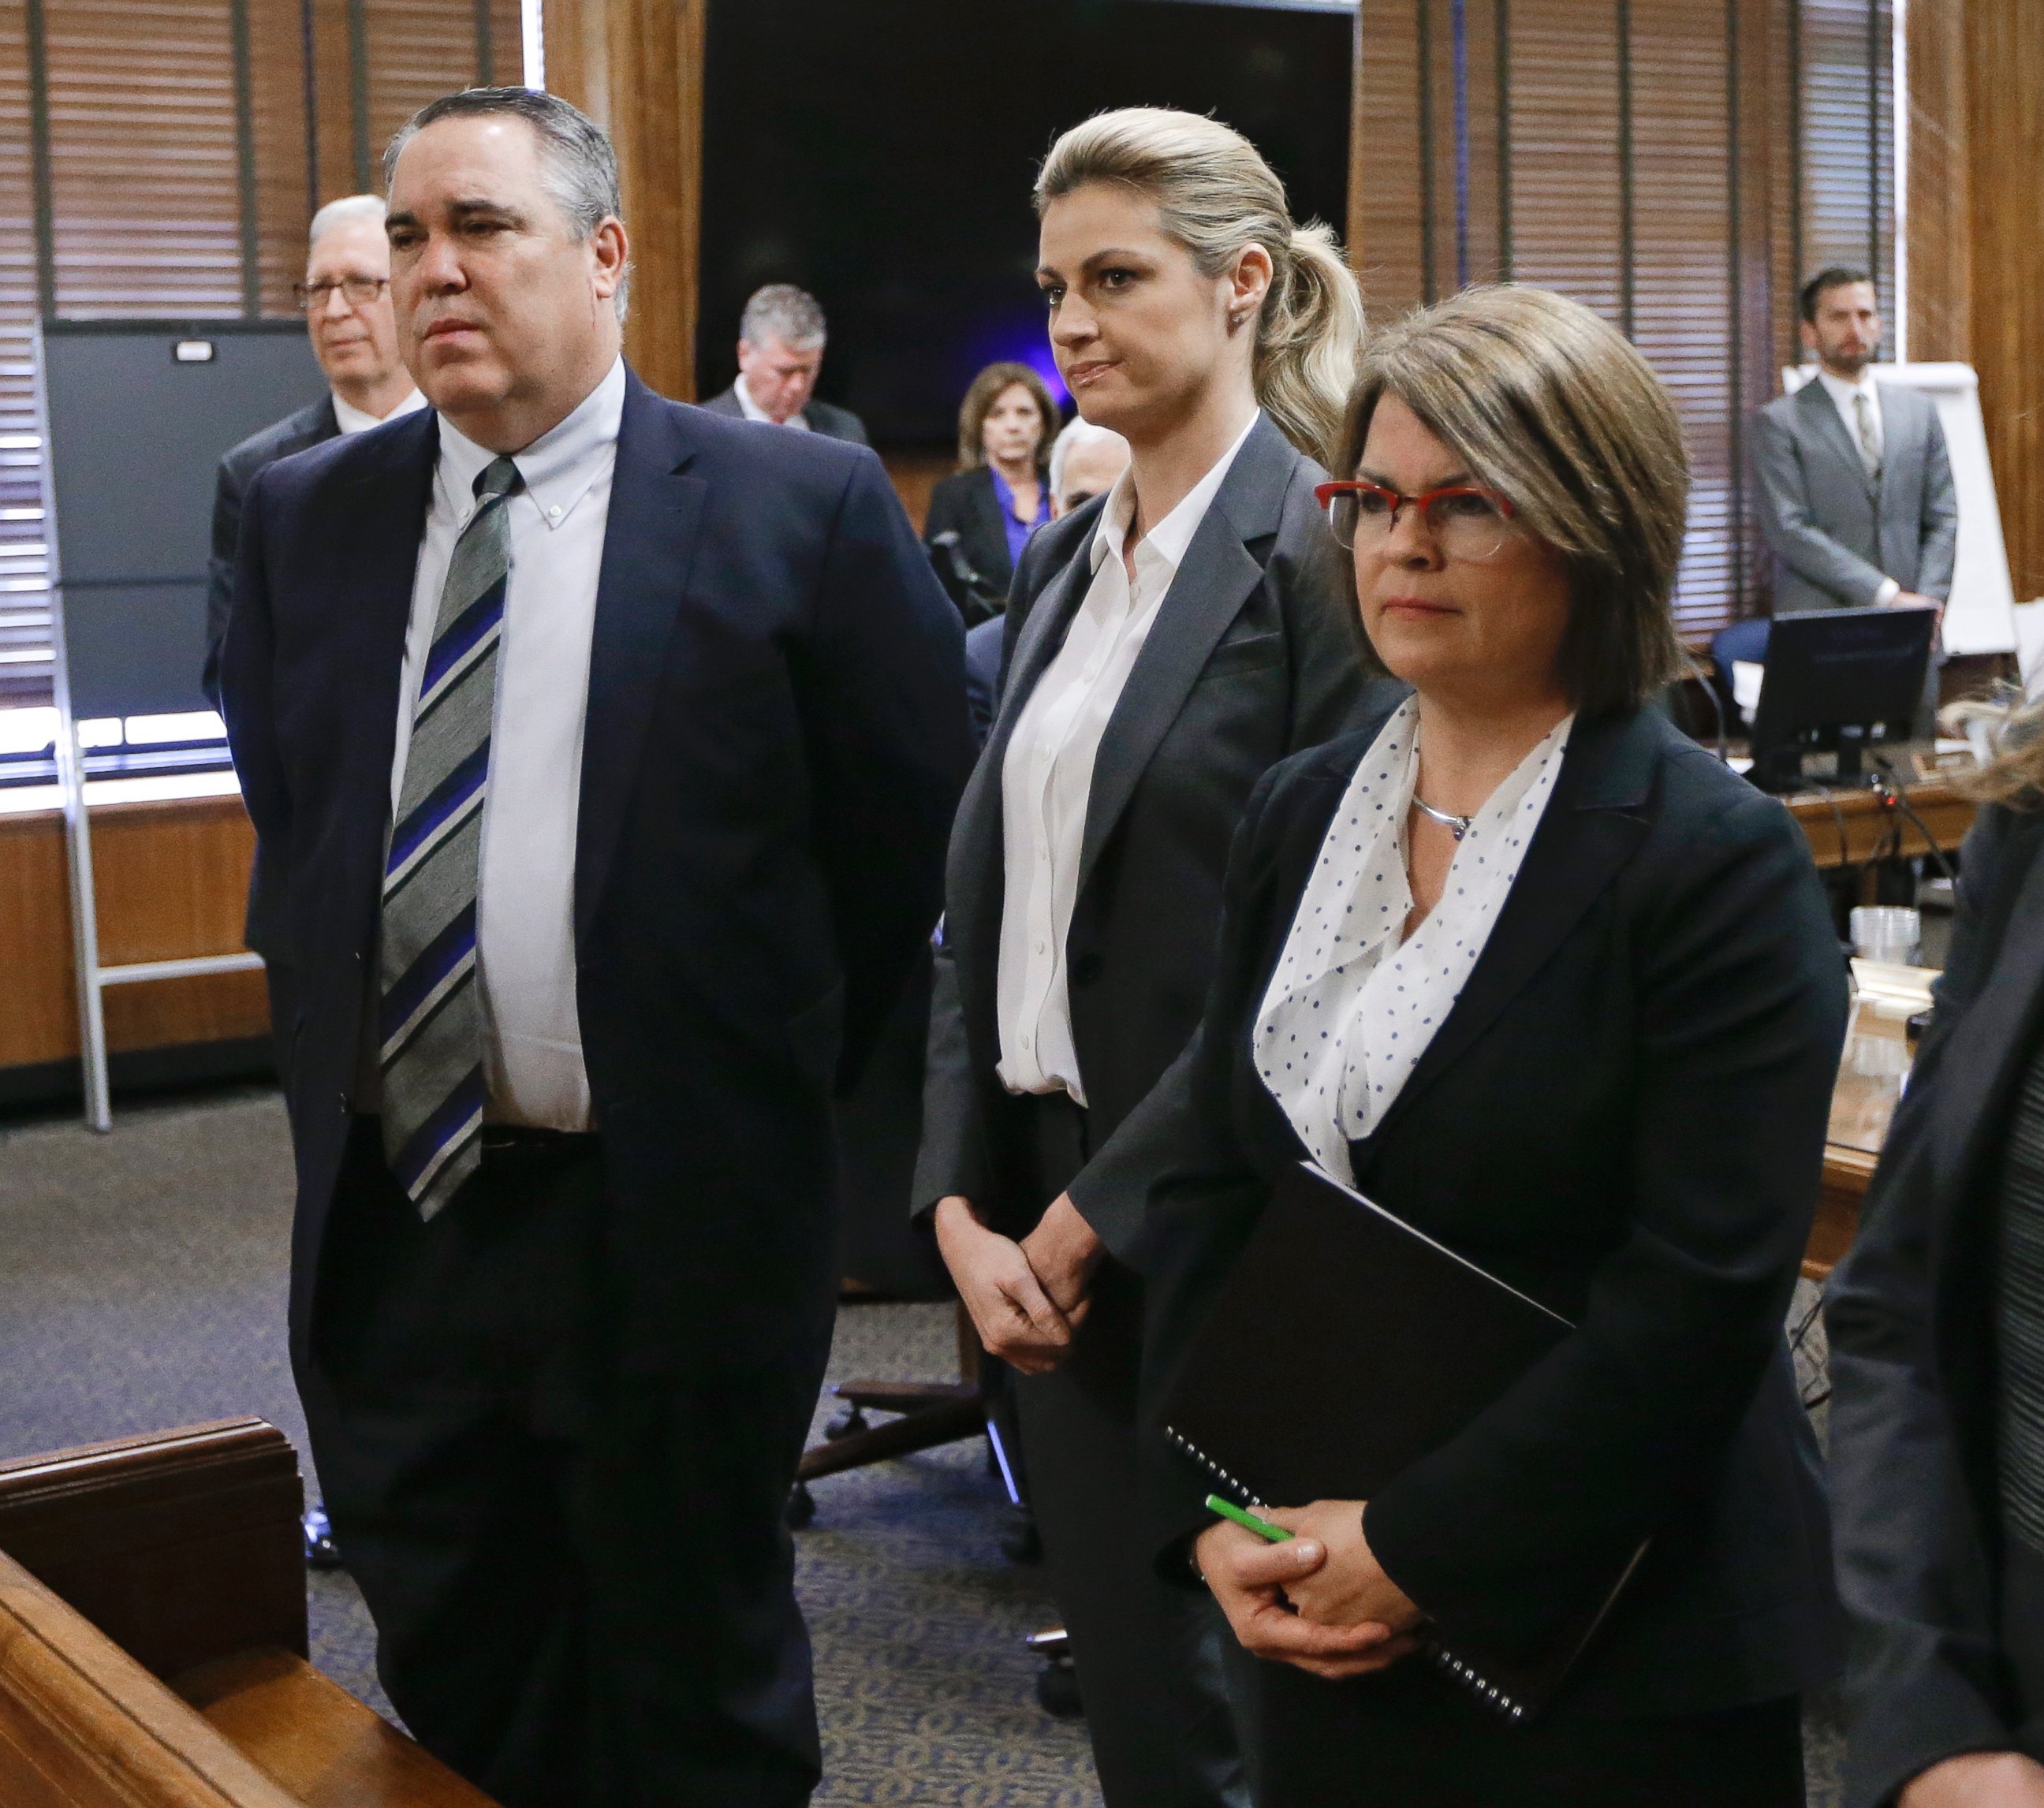 PHOTO:Erin Andrews, center, stands with attorney Scott Carr, left, as the jury enters the courtroom, March 7, 2016, in Nashville, Tenn.   